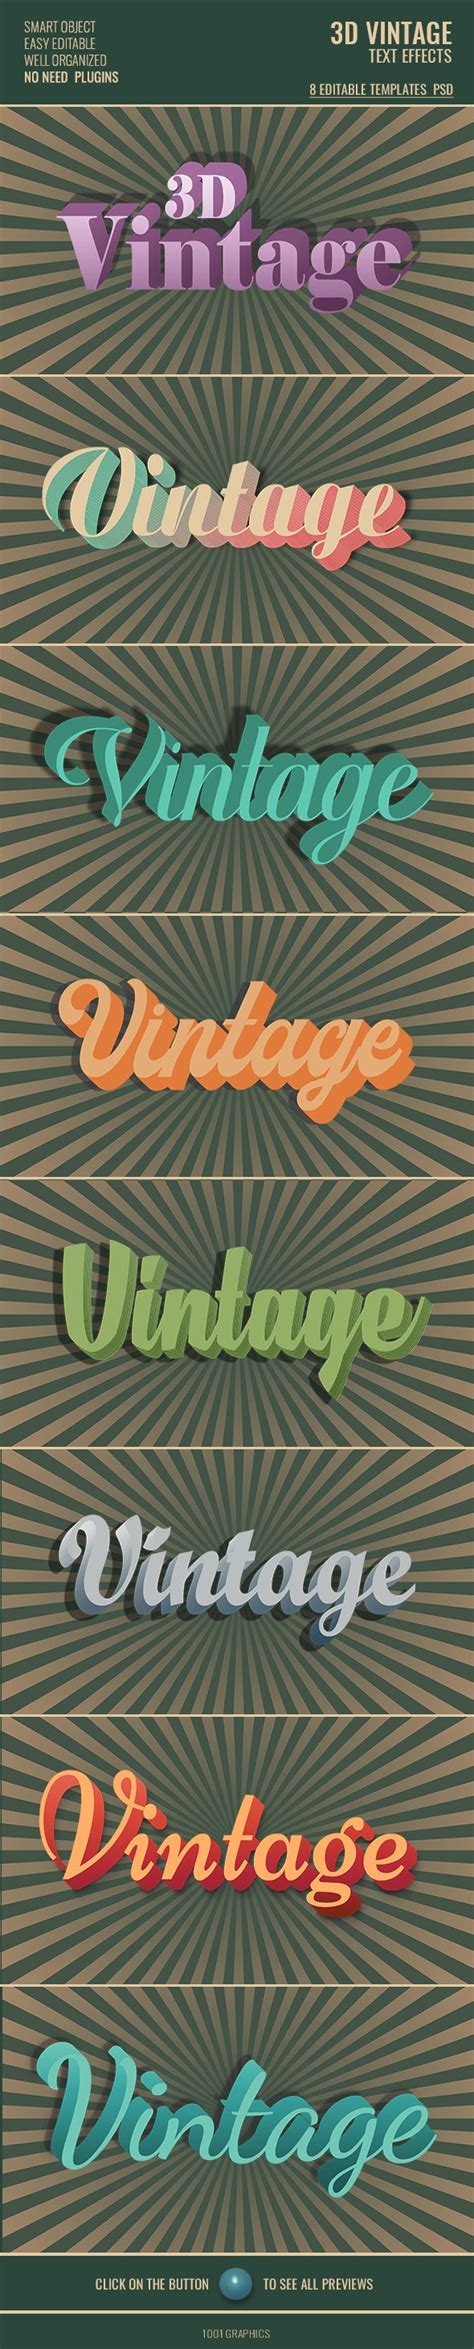 3d Vintage Text Effects 8 Psd Templates By 1001graphics Graphicriver